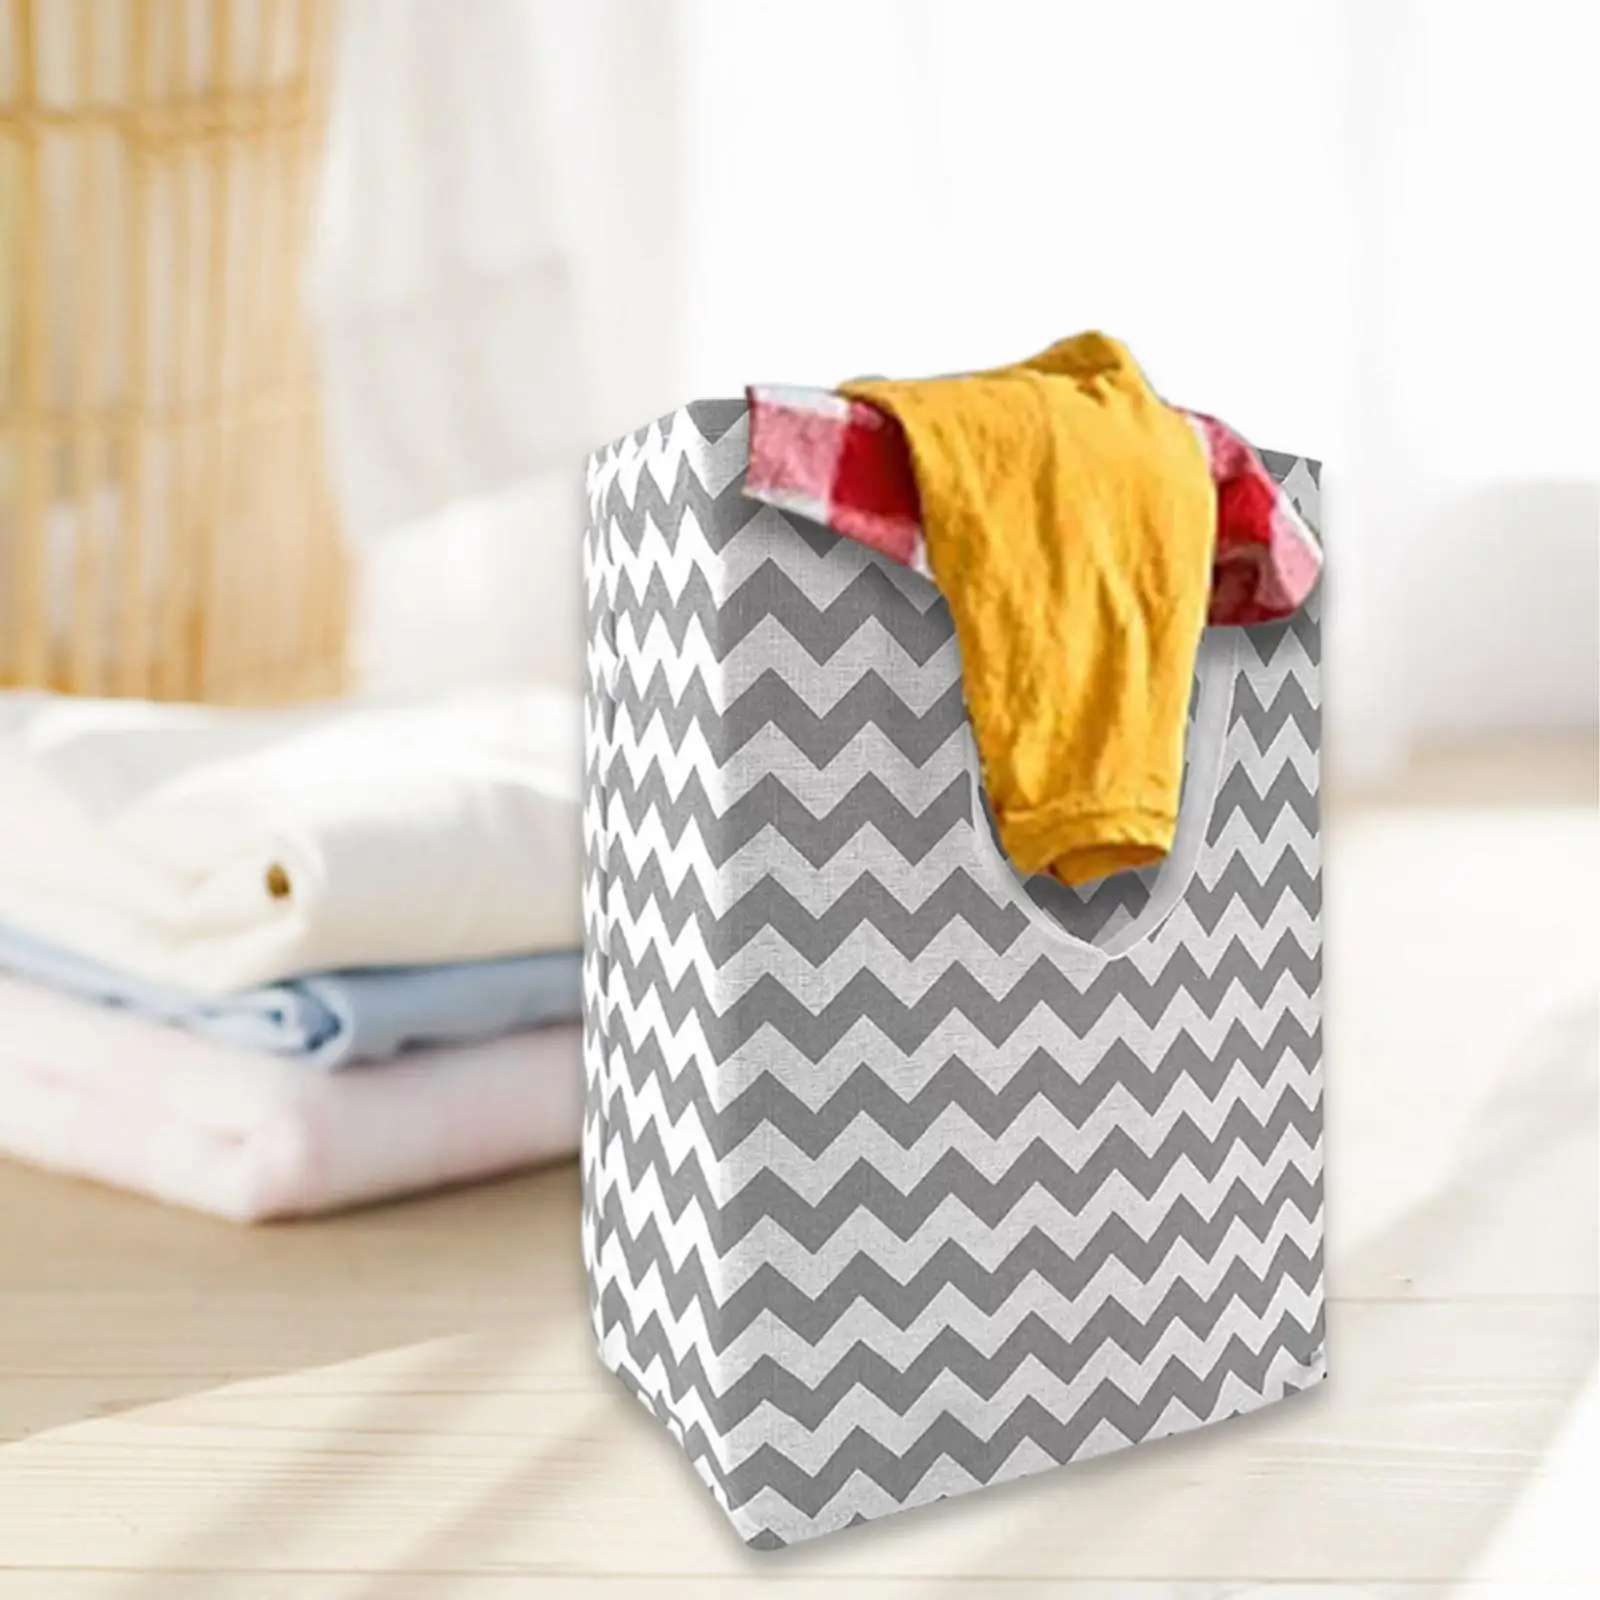 Laundry Storage Basket, Collapsible Laundry Hamper ,Clothes Storage Hamper Dirty Clothes Bag for Home, Living Room, Nursery